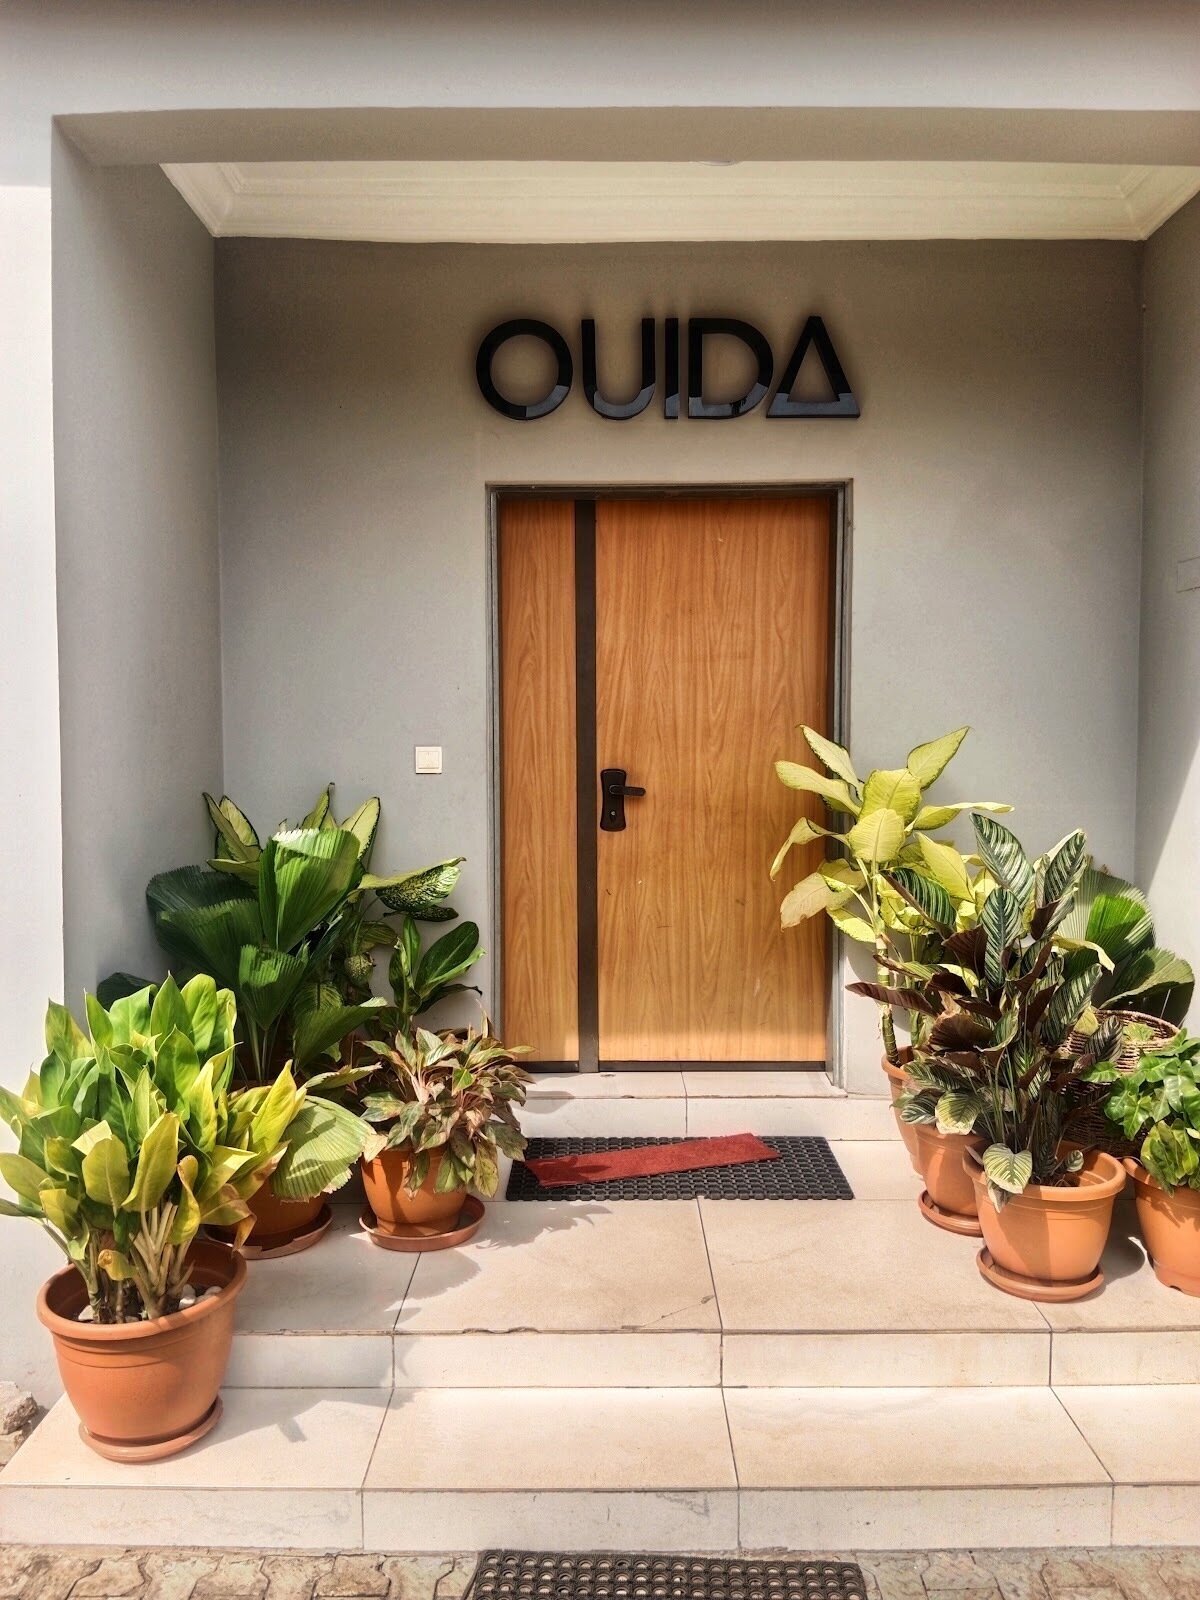 <span class="translation_missing" title="translation missing: en.meta.location_title, location_name: Ouida, city: Lagos">Location Title</span>